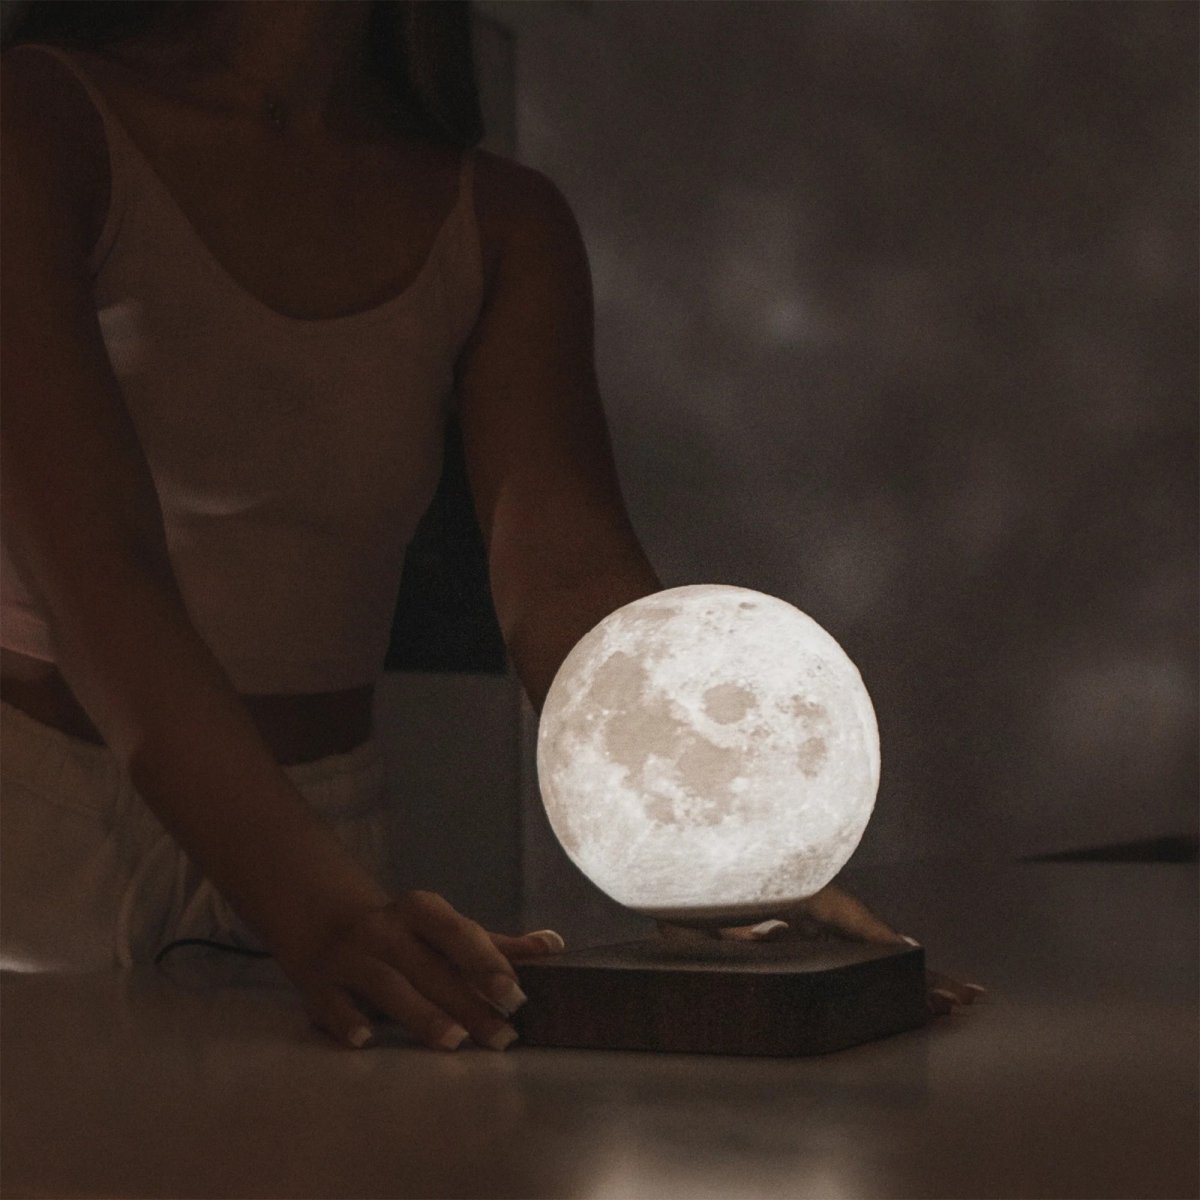 Magnetic Moon Lamp Gifts for Friends and Family Sohnne® Table Lamp Kagura Moon Lamp 6.7"